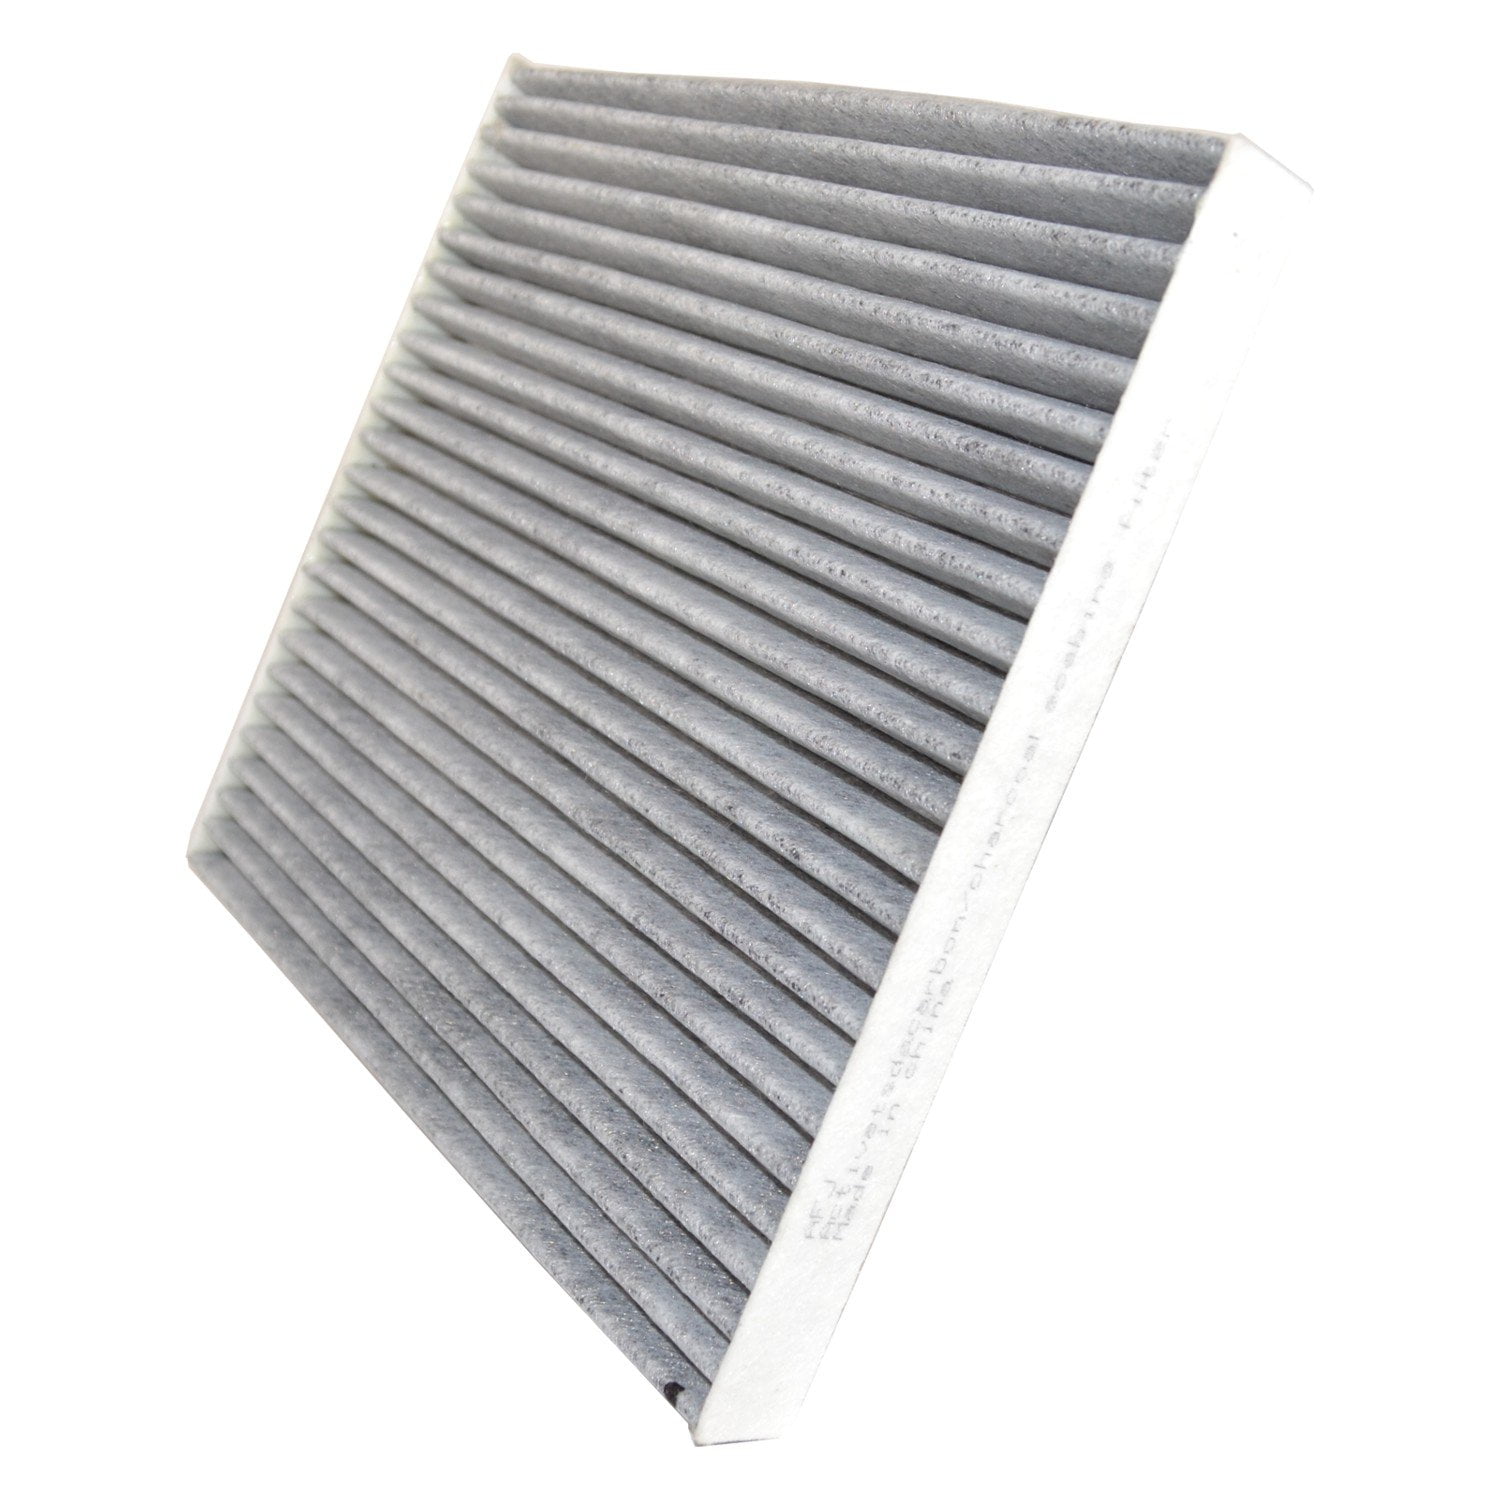 HQRP Cabin Air Filter compatible with Saturn VUE Red Line 2008 / 2009 Activated Charcoal 2009 Saturn Aura Cabin Air Filter Location